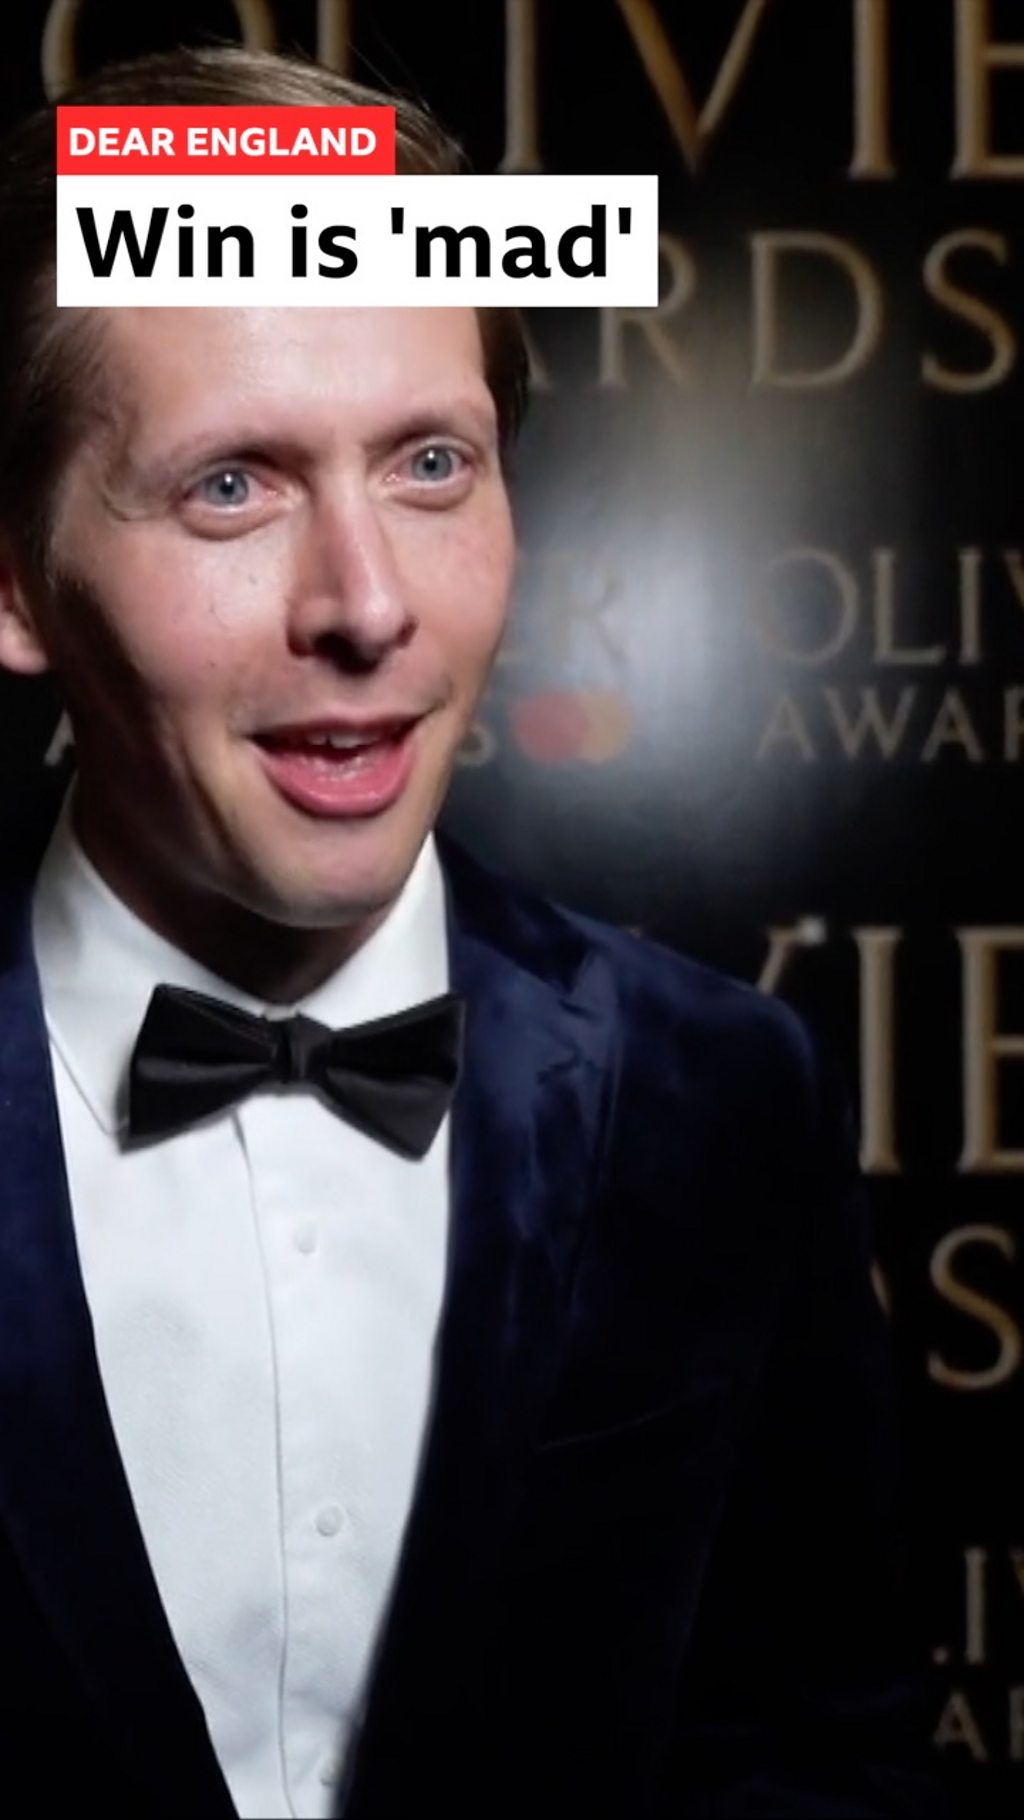 Actor Will Close wearing tuxedo and bowtie holding his Olivier Award